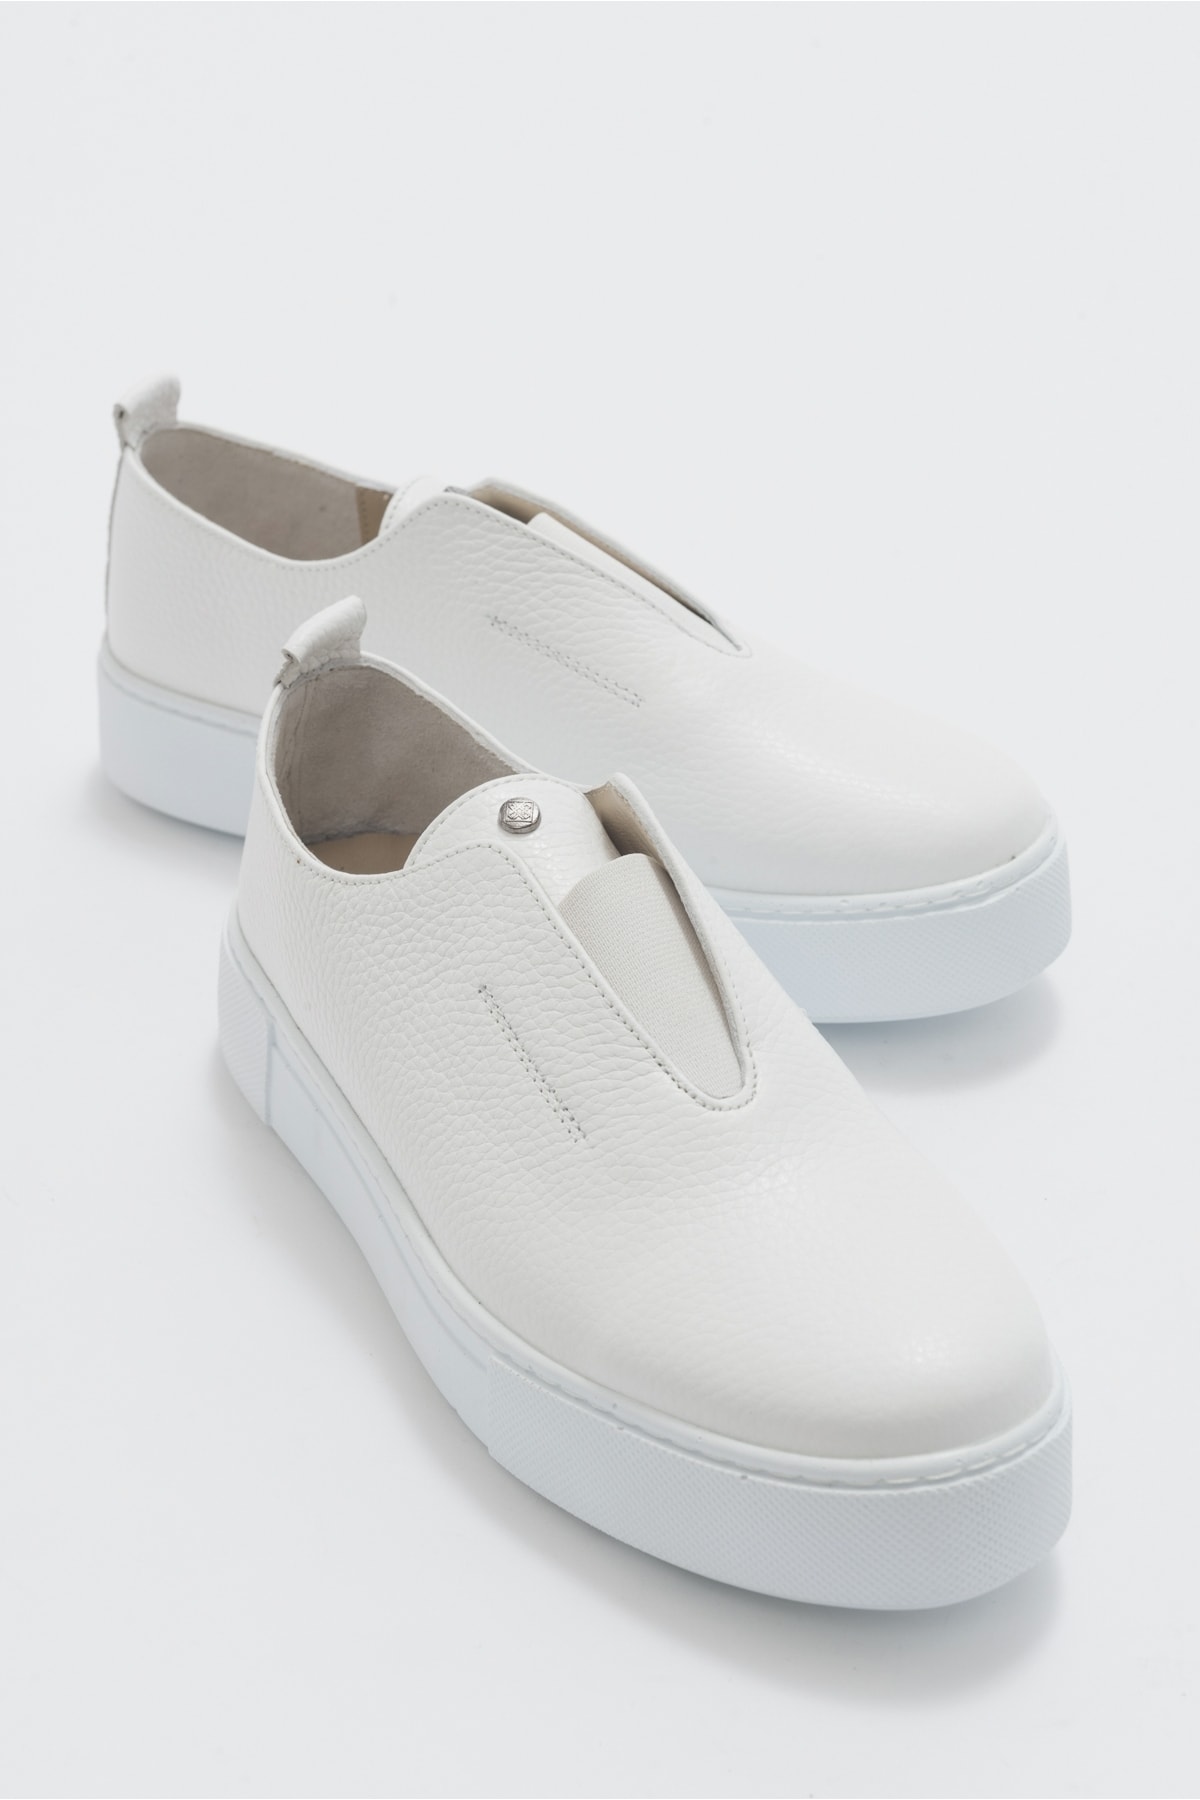 LuviShoes Boom White Leather Women's Sneakers